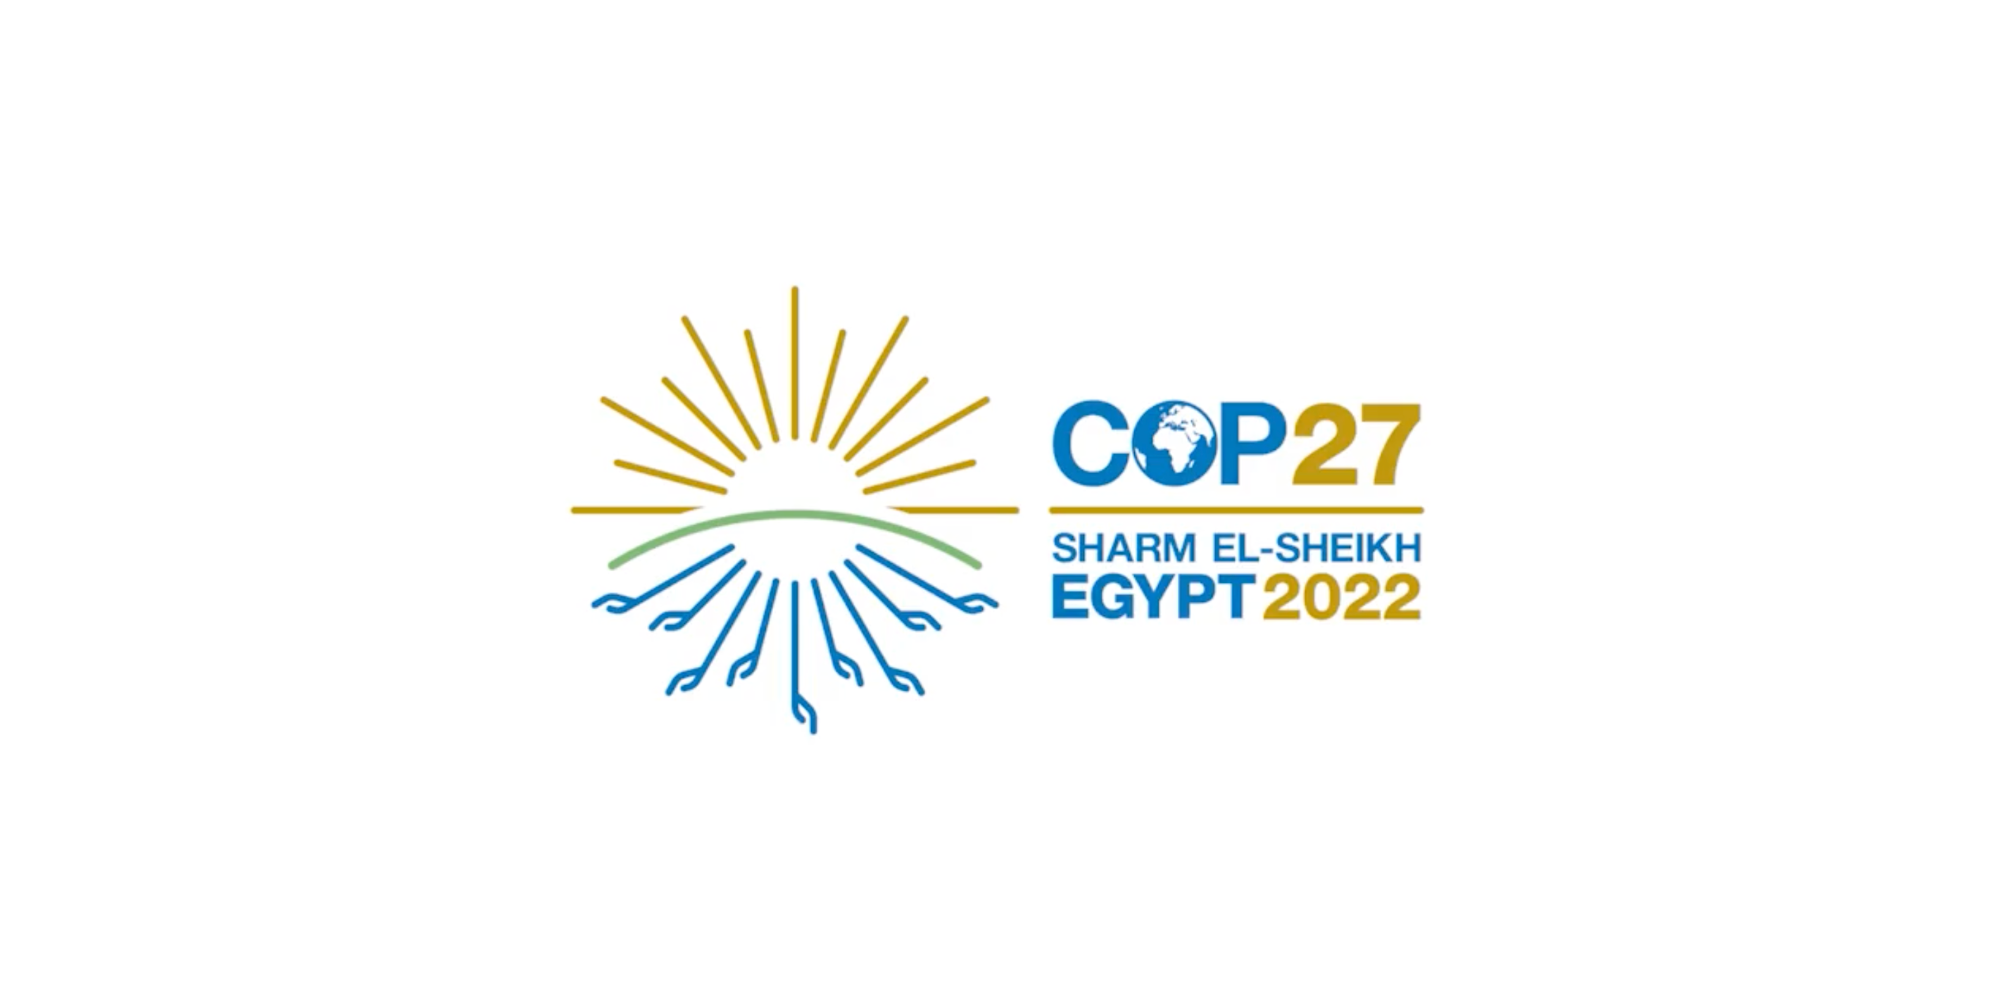 The GPFLR partners actions at COP27